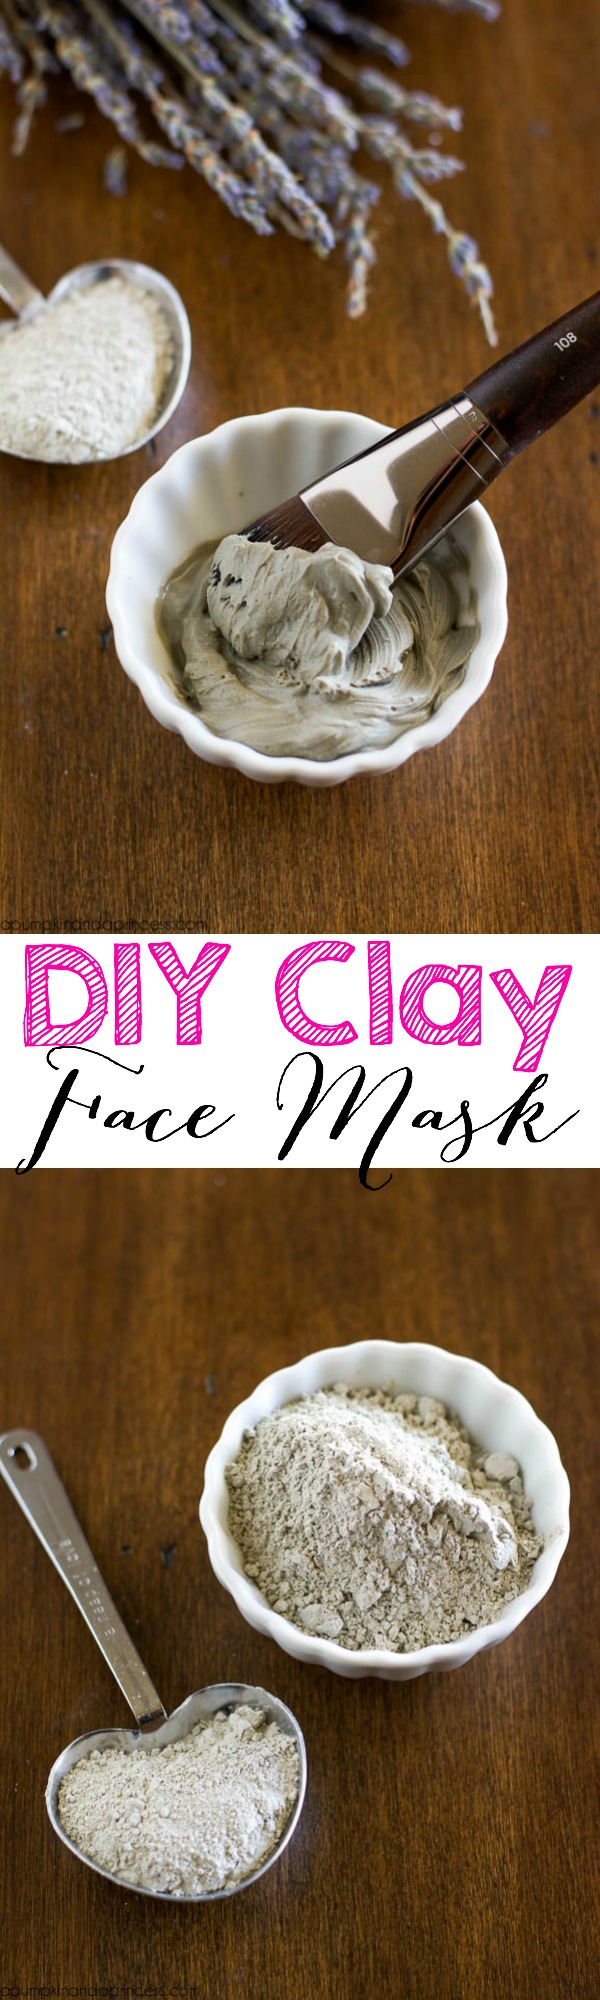 this cleanse mask DIY  diy skin mask Clay â€“ clay with face Mask  easy European  clay